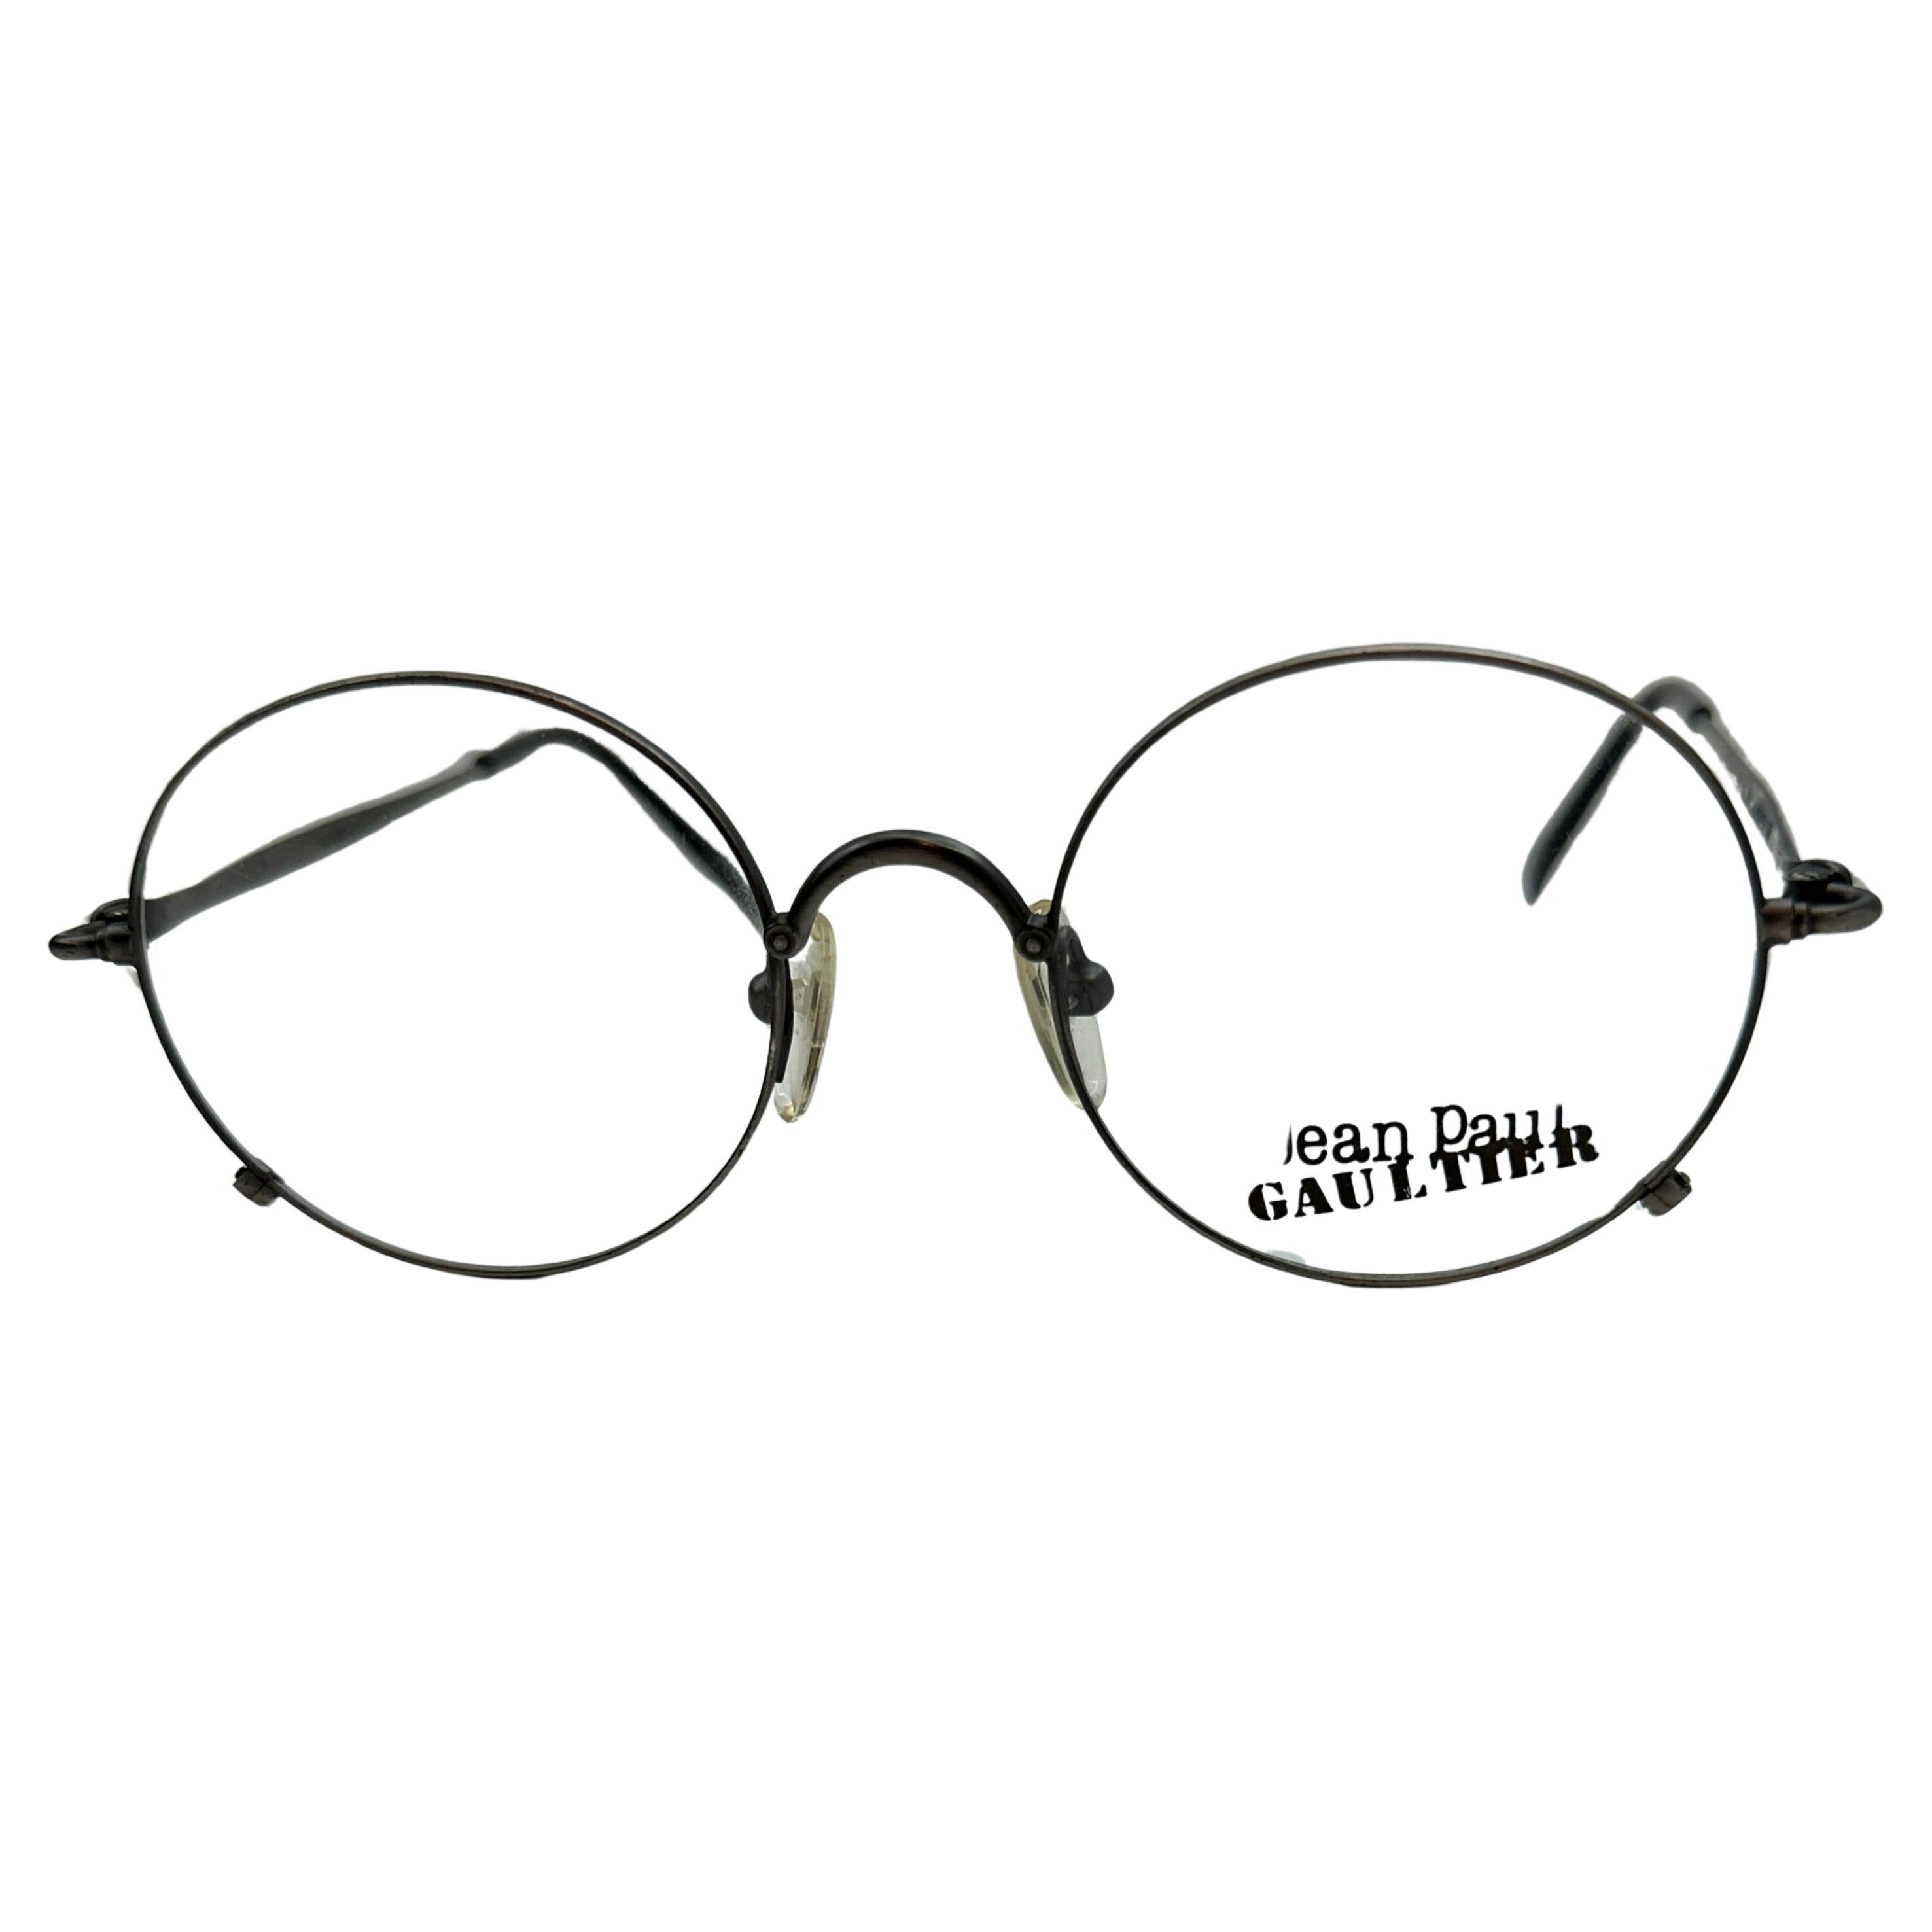 Who distributed Jean Paul Gaultier glasses in the mid-1990s?